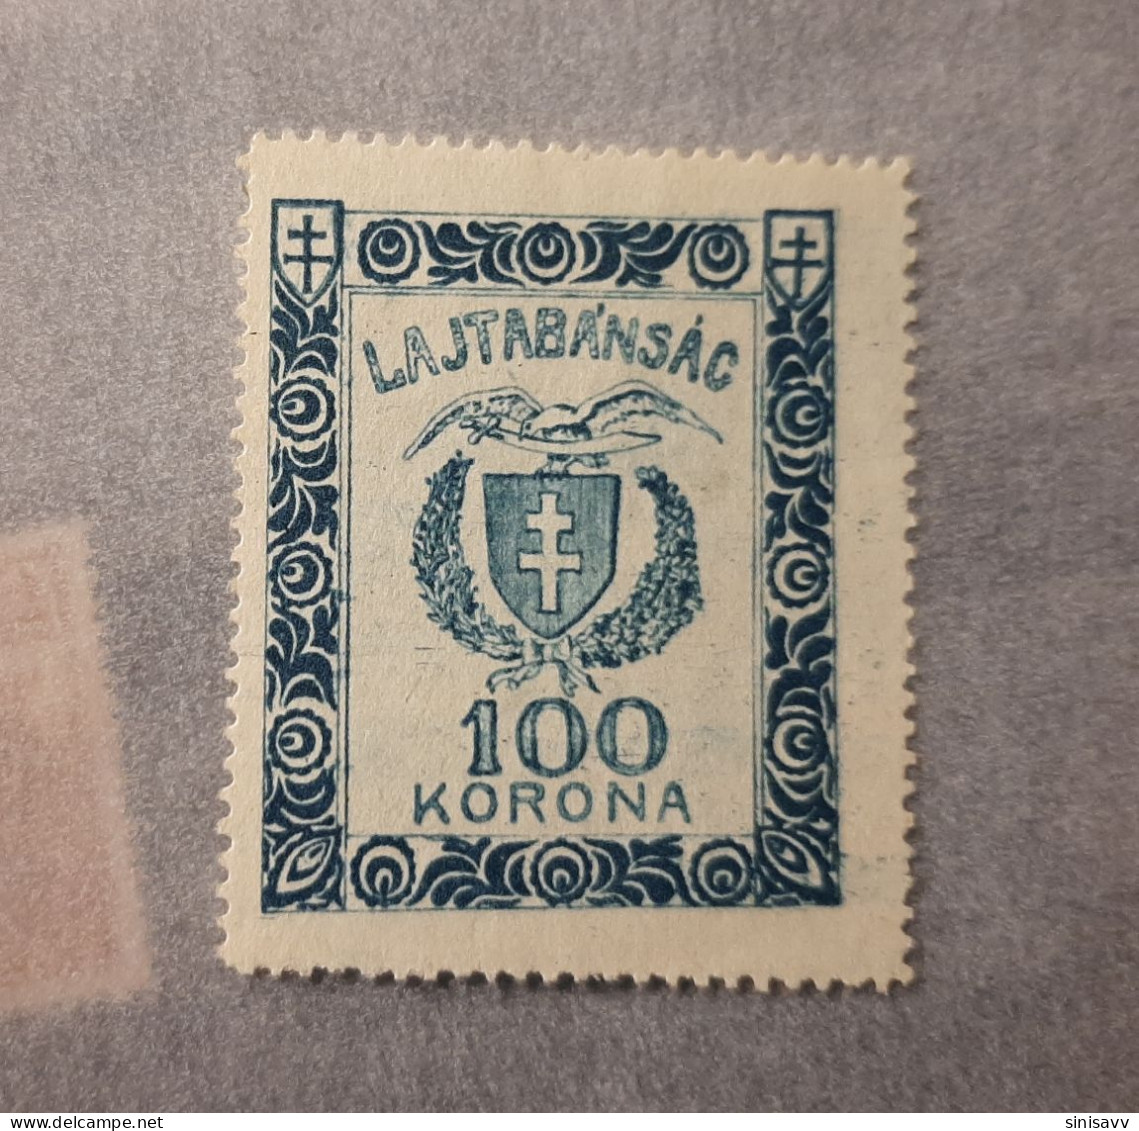 Western Hungary - Local Stamps 1921 - Lajtabánság - Local Post Stamps